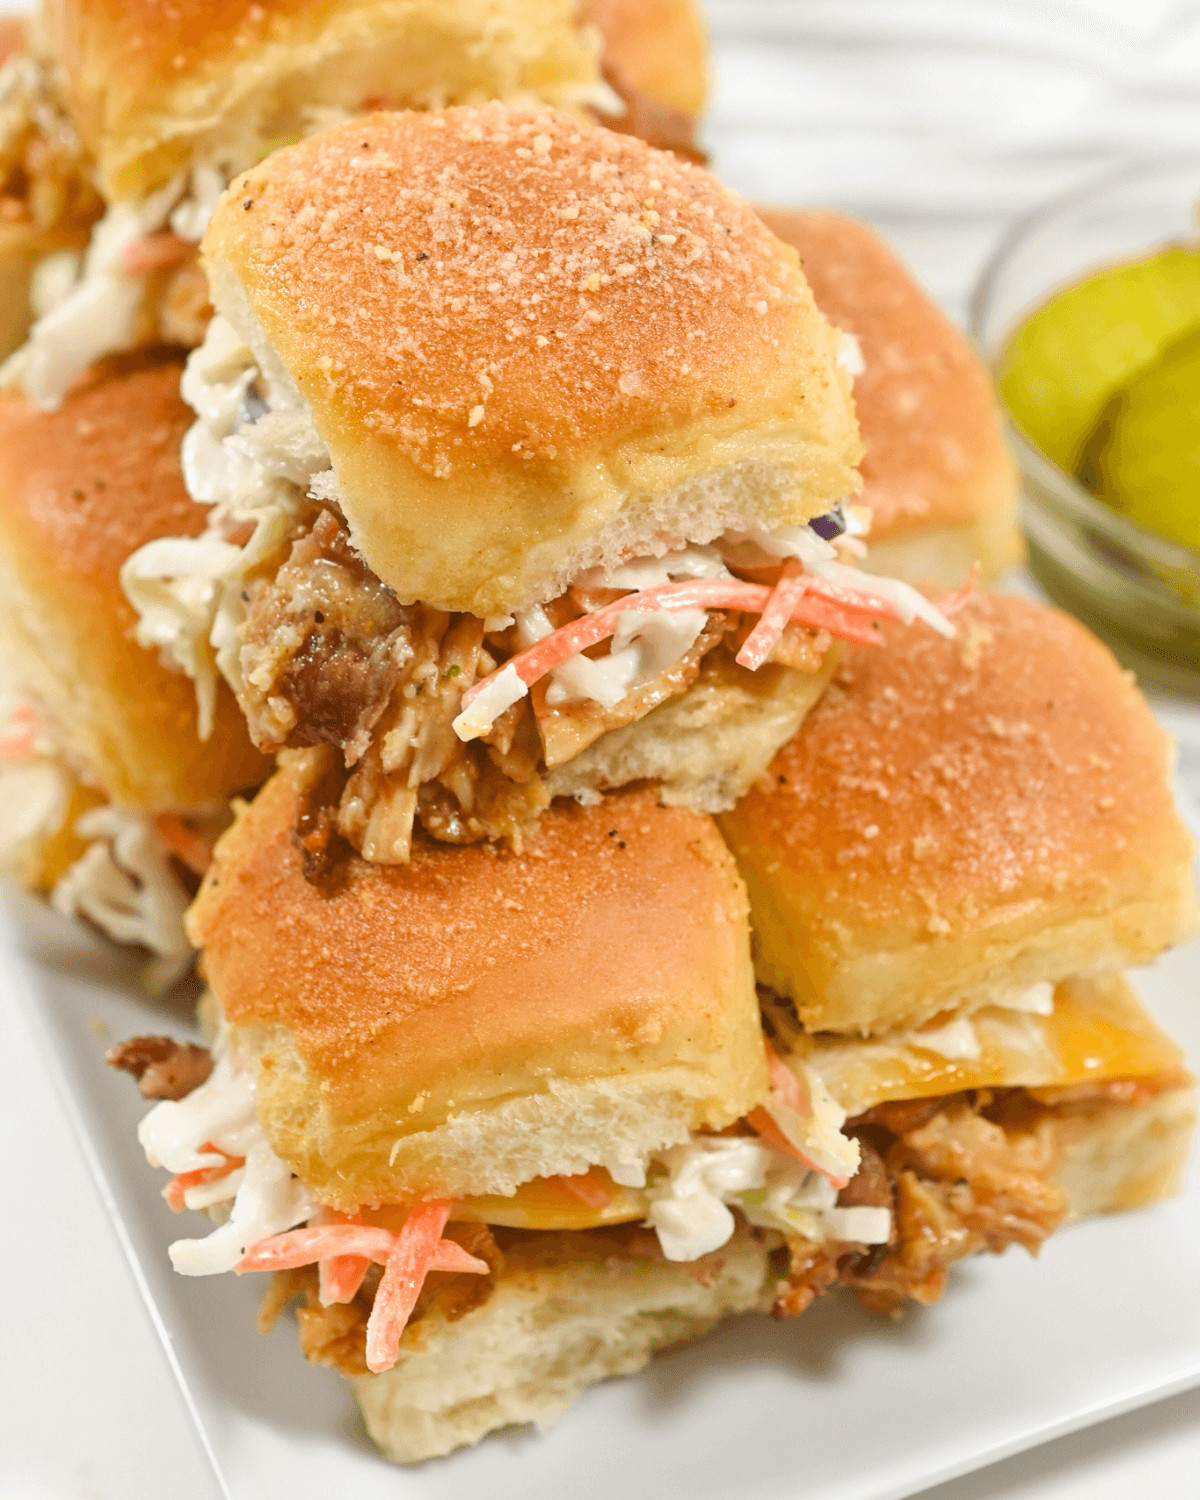 A close up on the bbq chicken sliders.